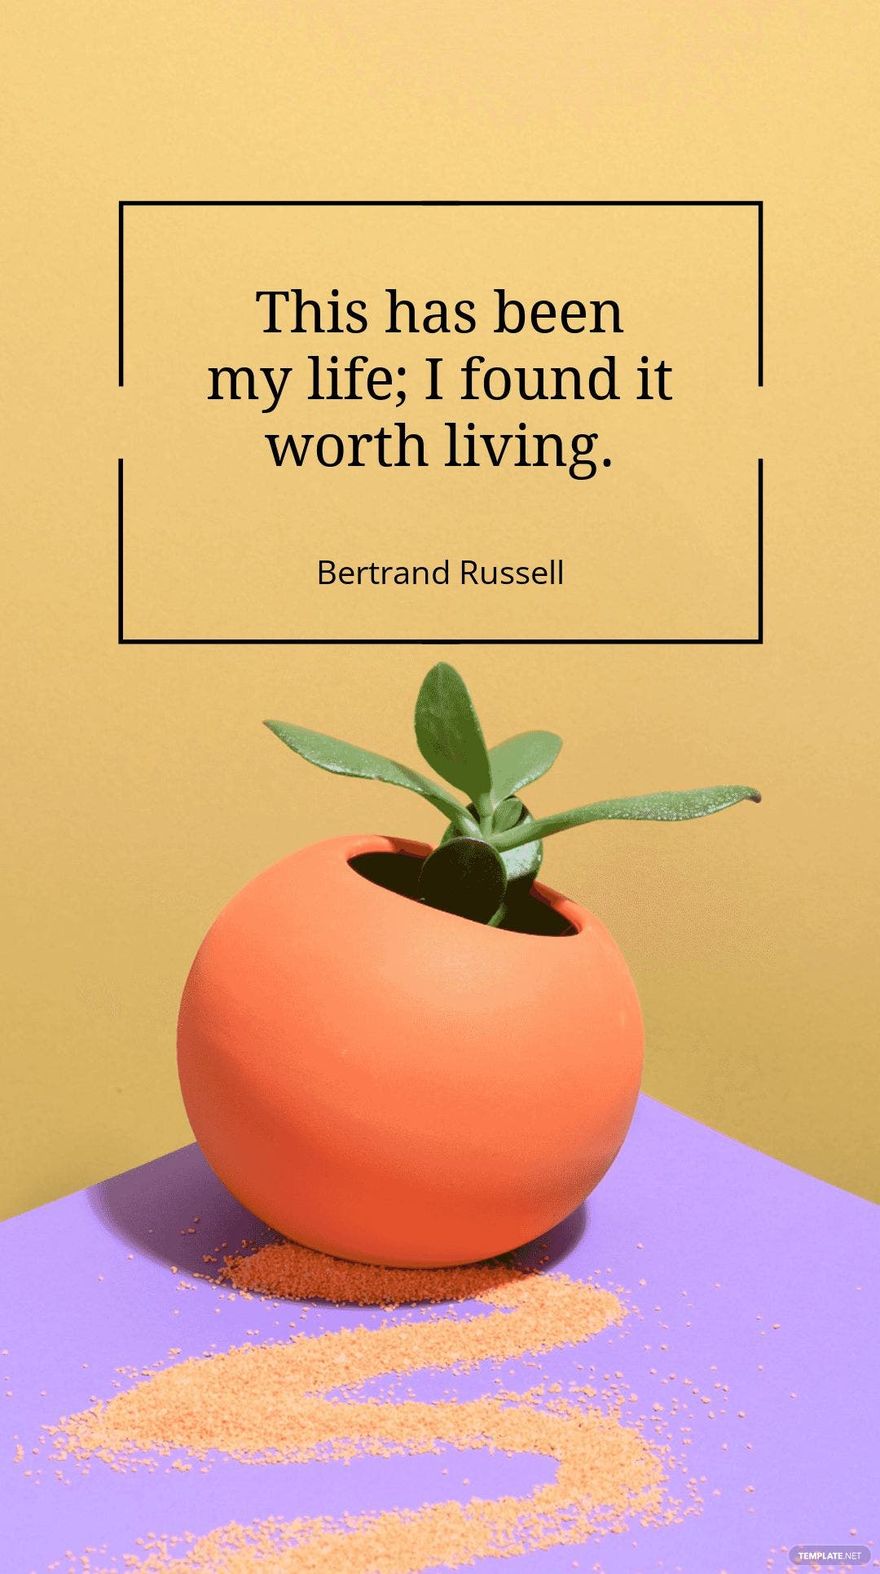 Bertrand Russell - “This has been my life; I found it worth living.”